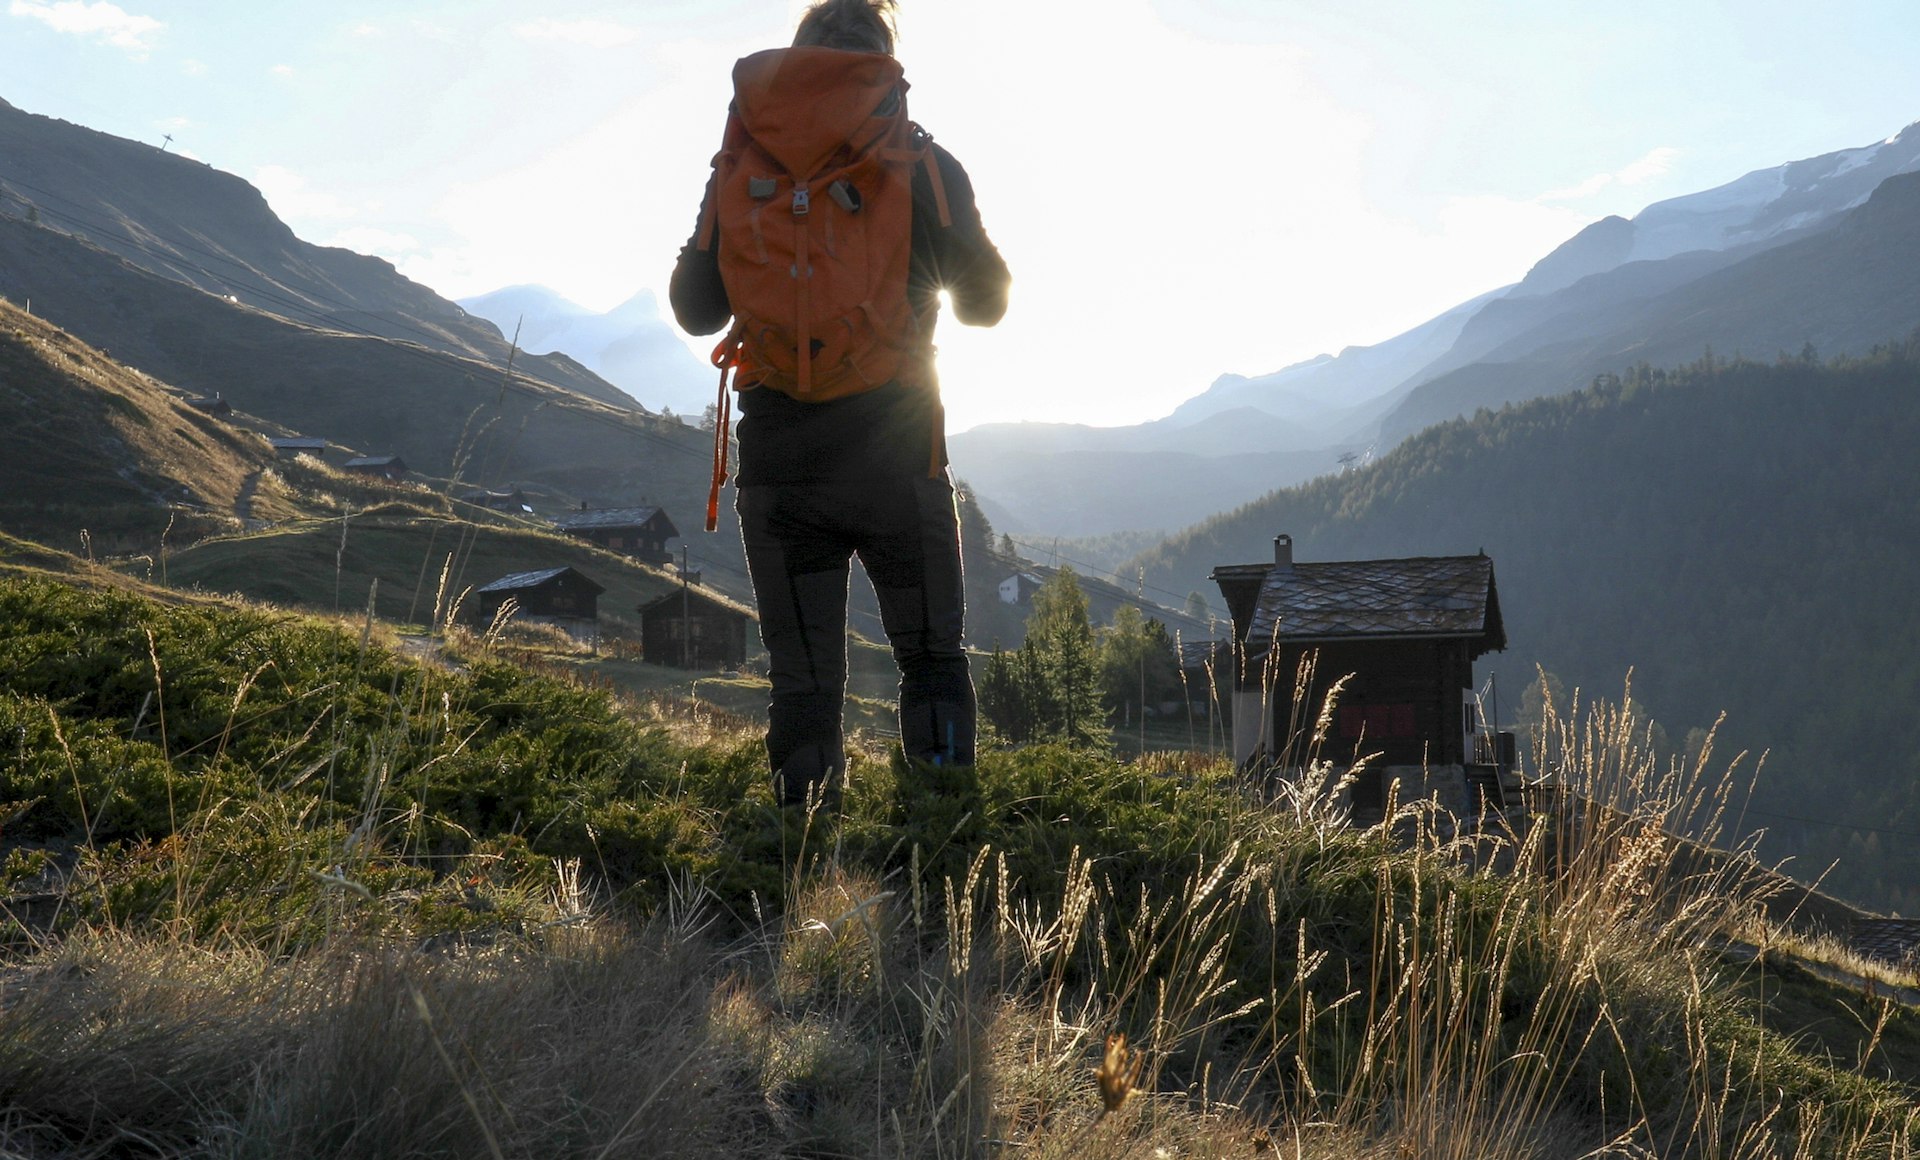 A hiker with a backpack looks off to distant Alps as huts line up in front of him